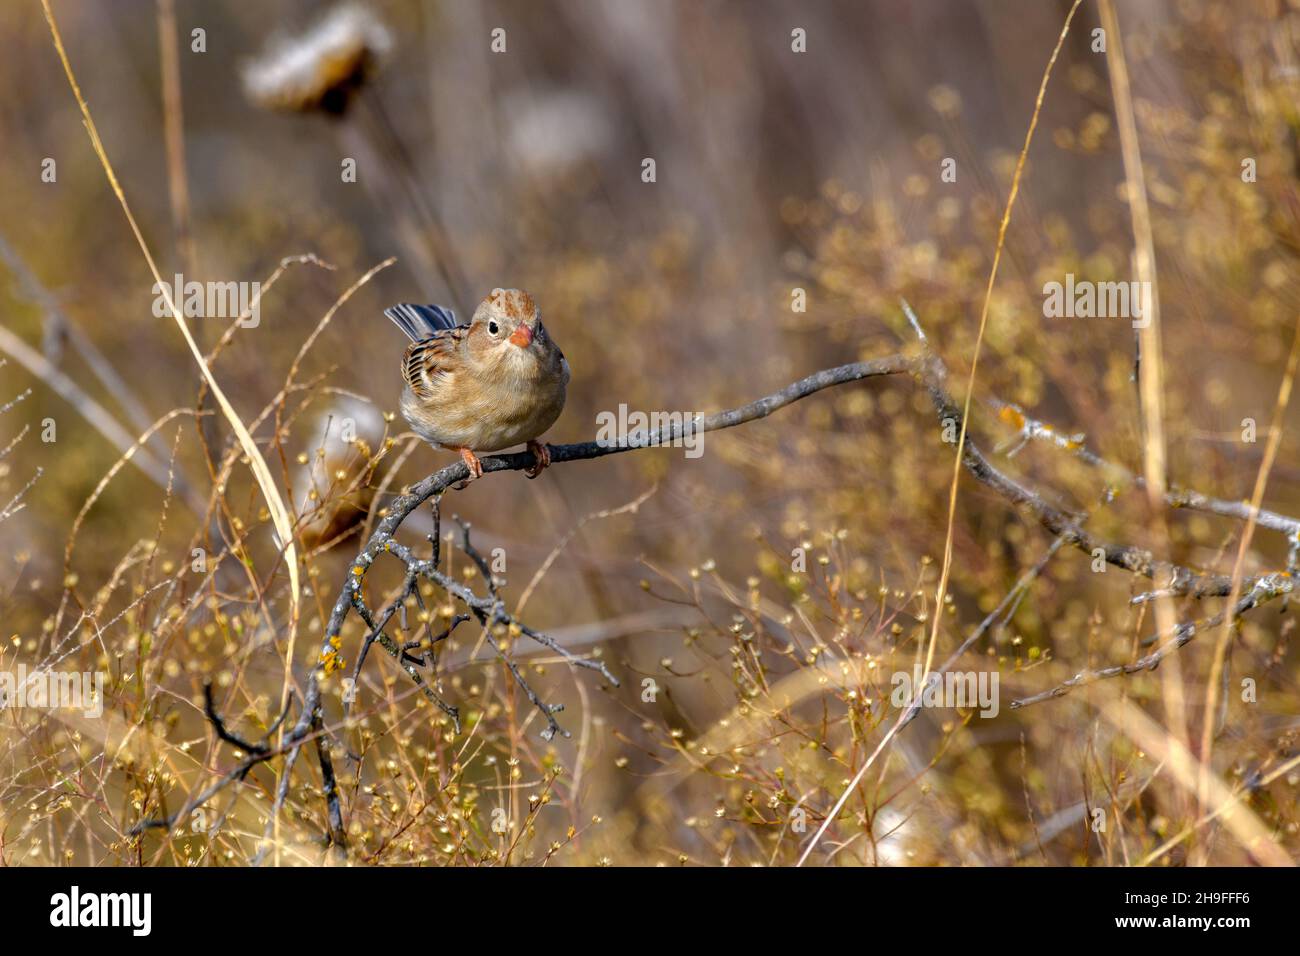 Field Sparrow - Spizella pusilla - perched on twig in tall grass and vegitation Stock Photo